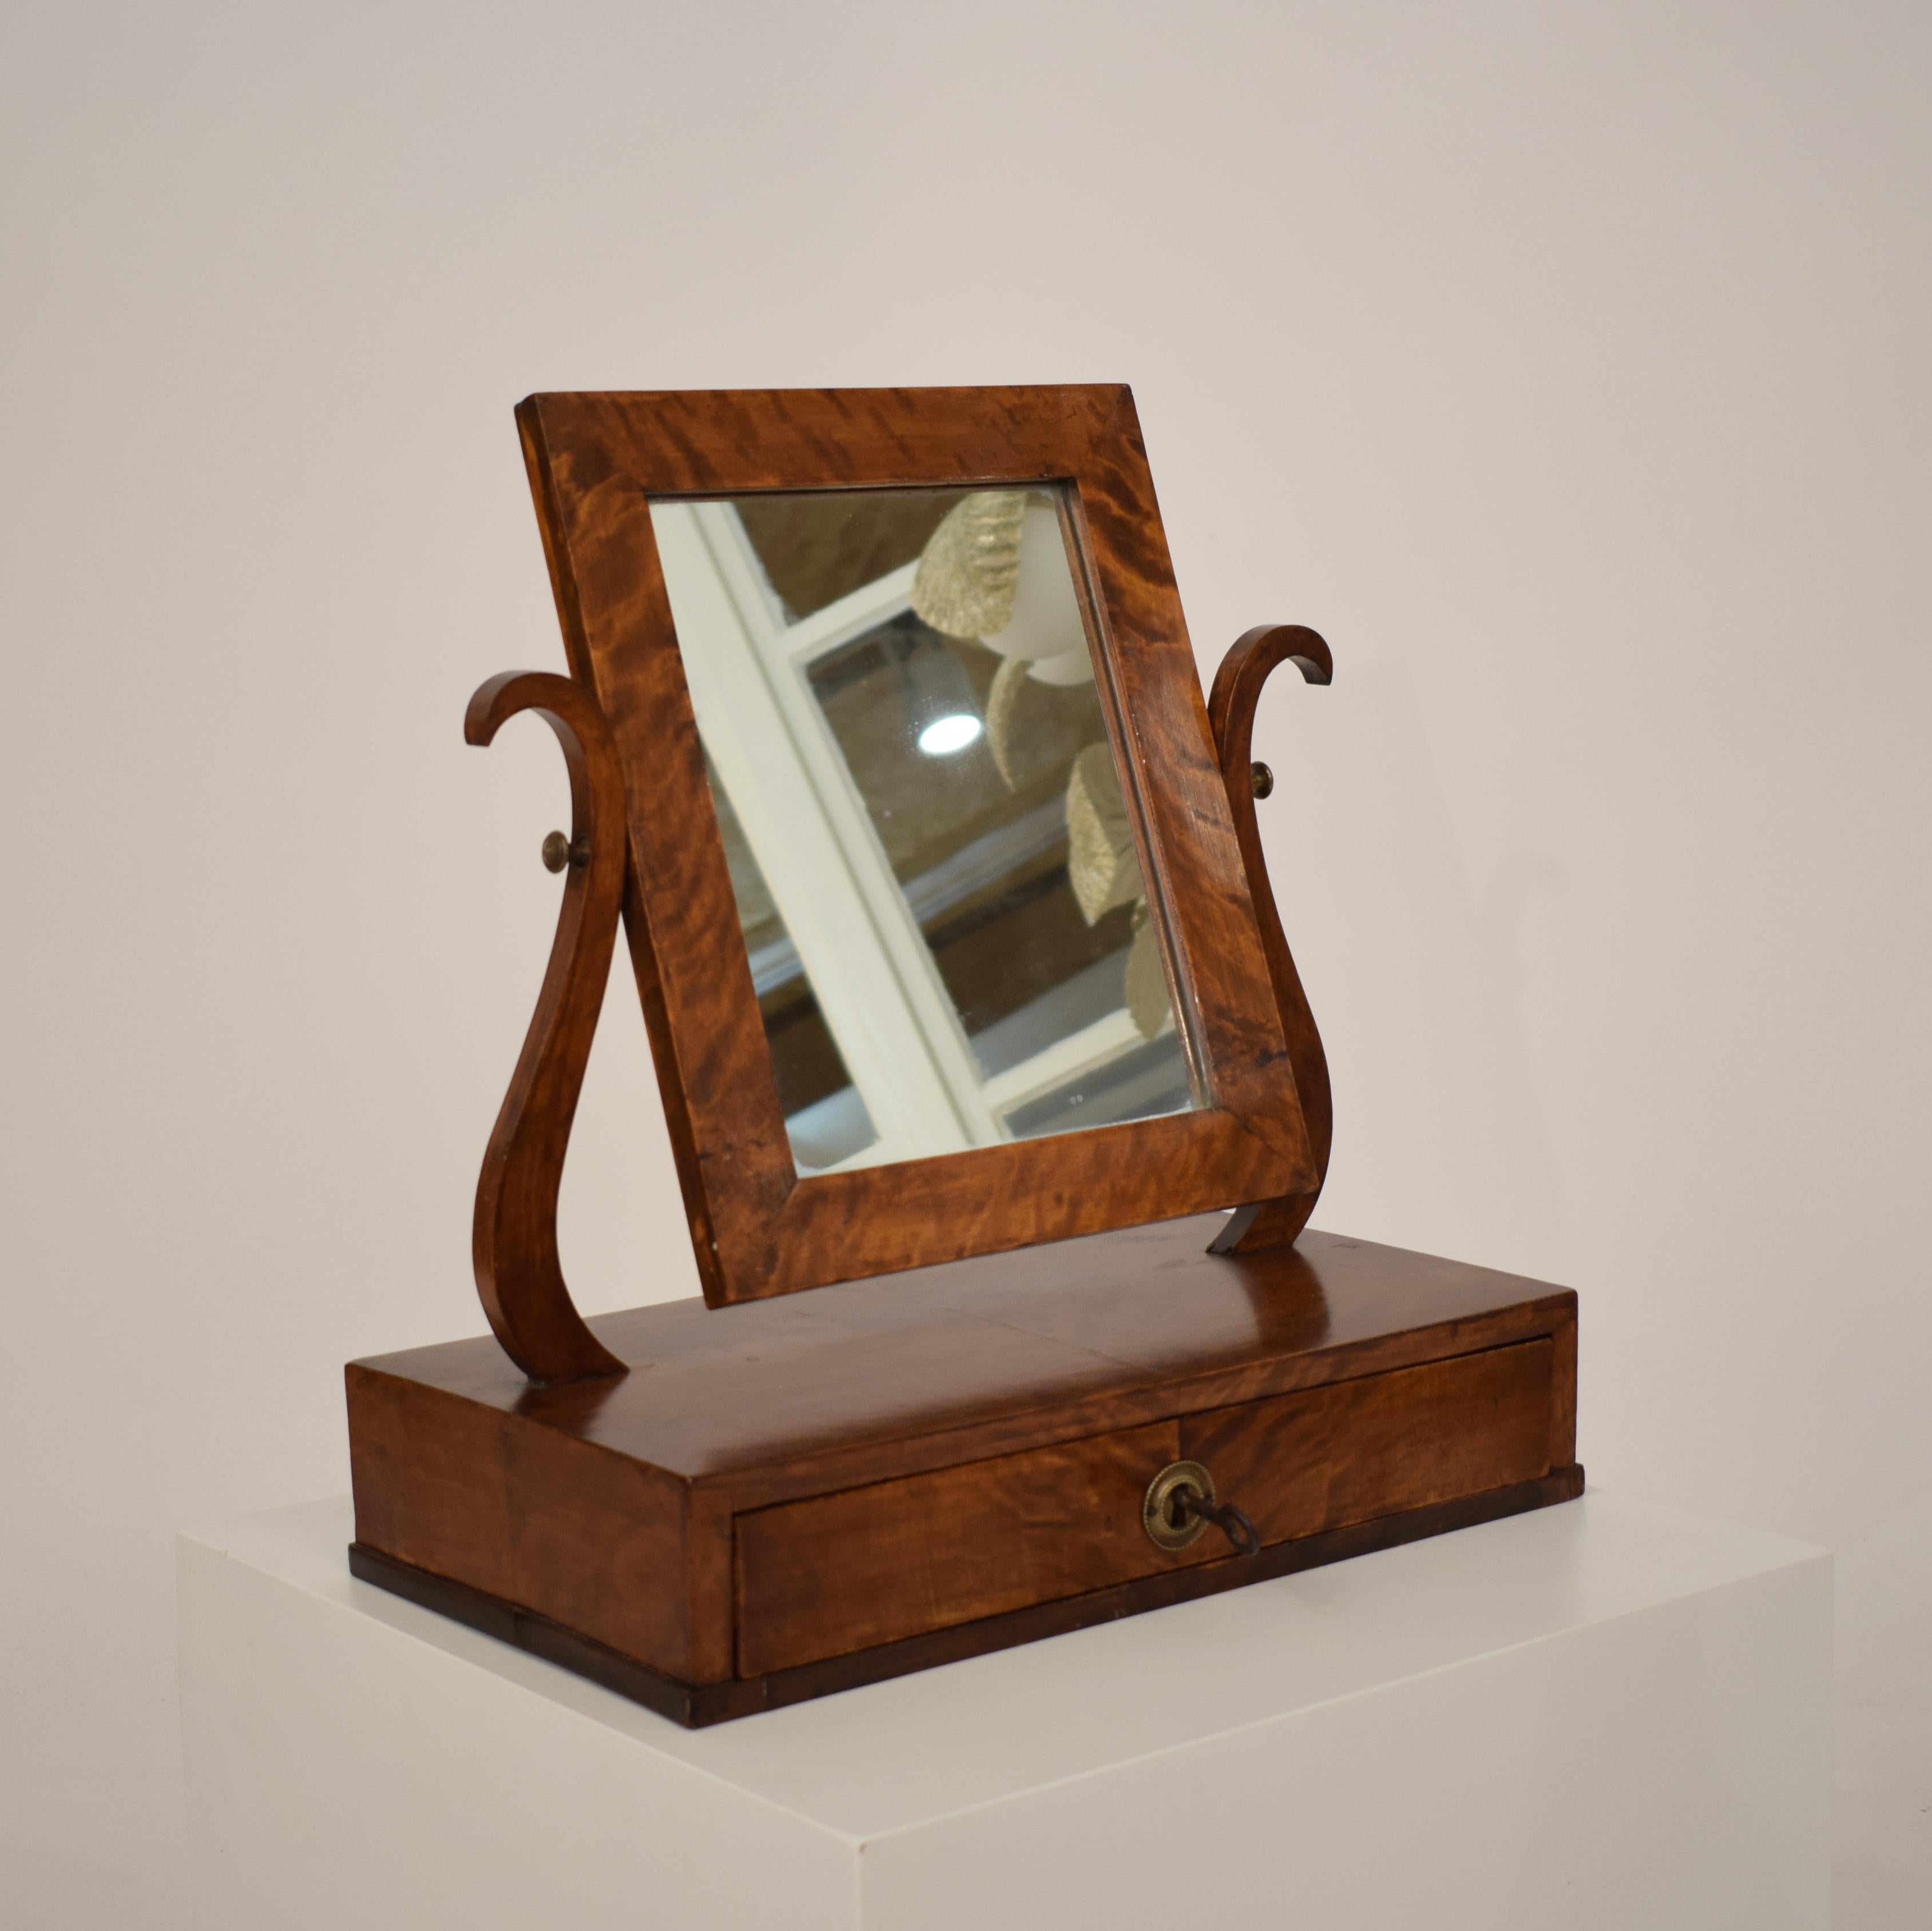 This beautiful 19th century German birch Biedermeier toilet mirror. It has got one drawer and was made circa 1820.
It is in great condition.
A unique piece which is a great eyecatcher for your antique, modern, space age or midcentury